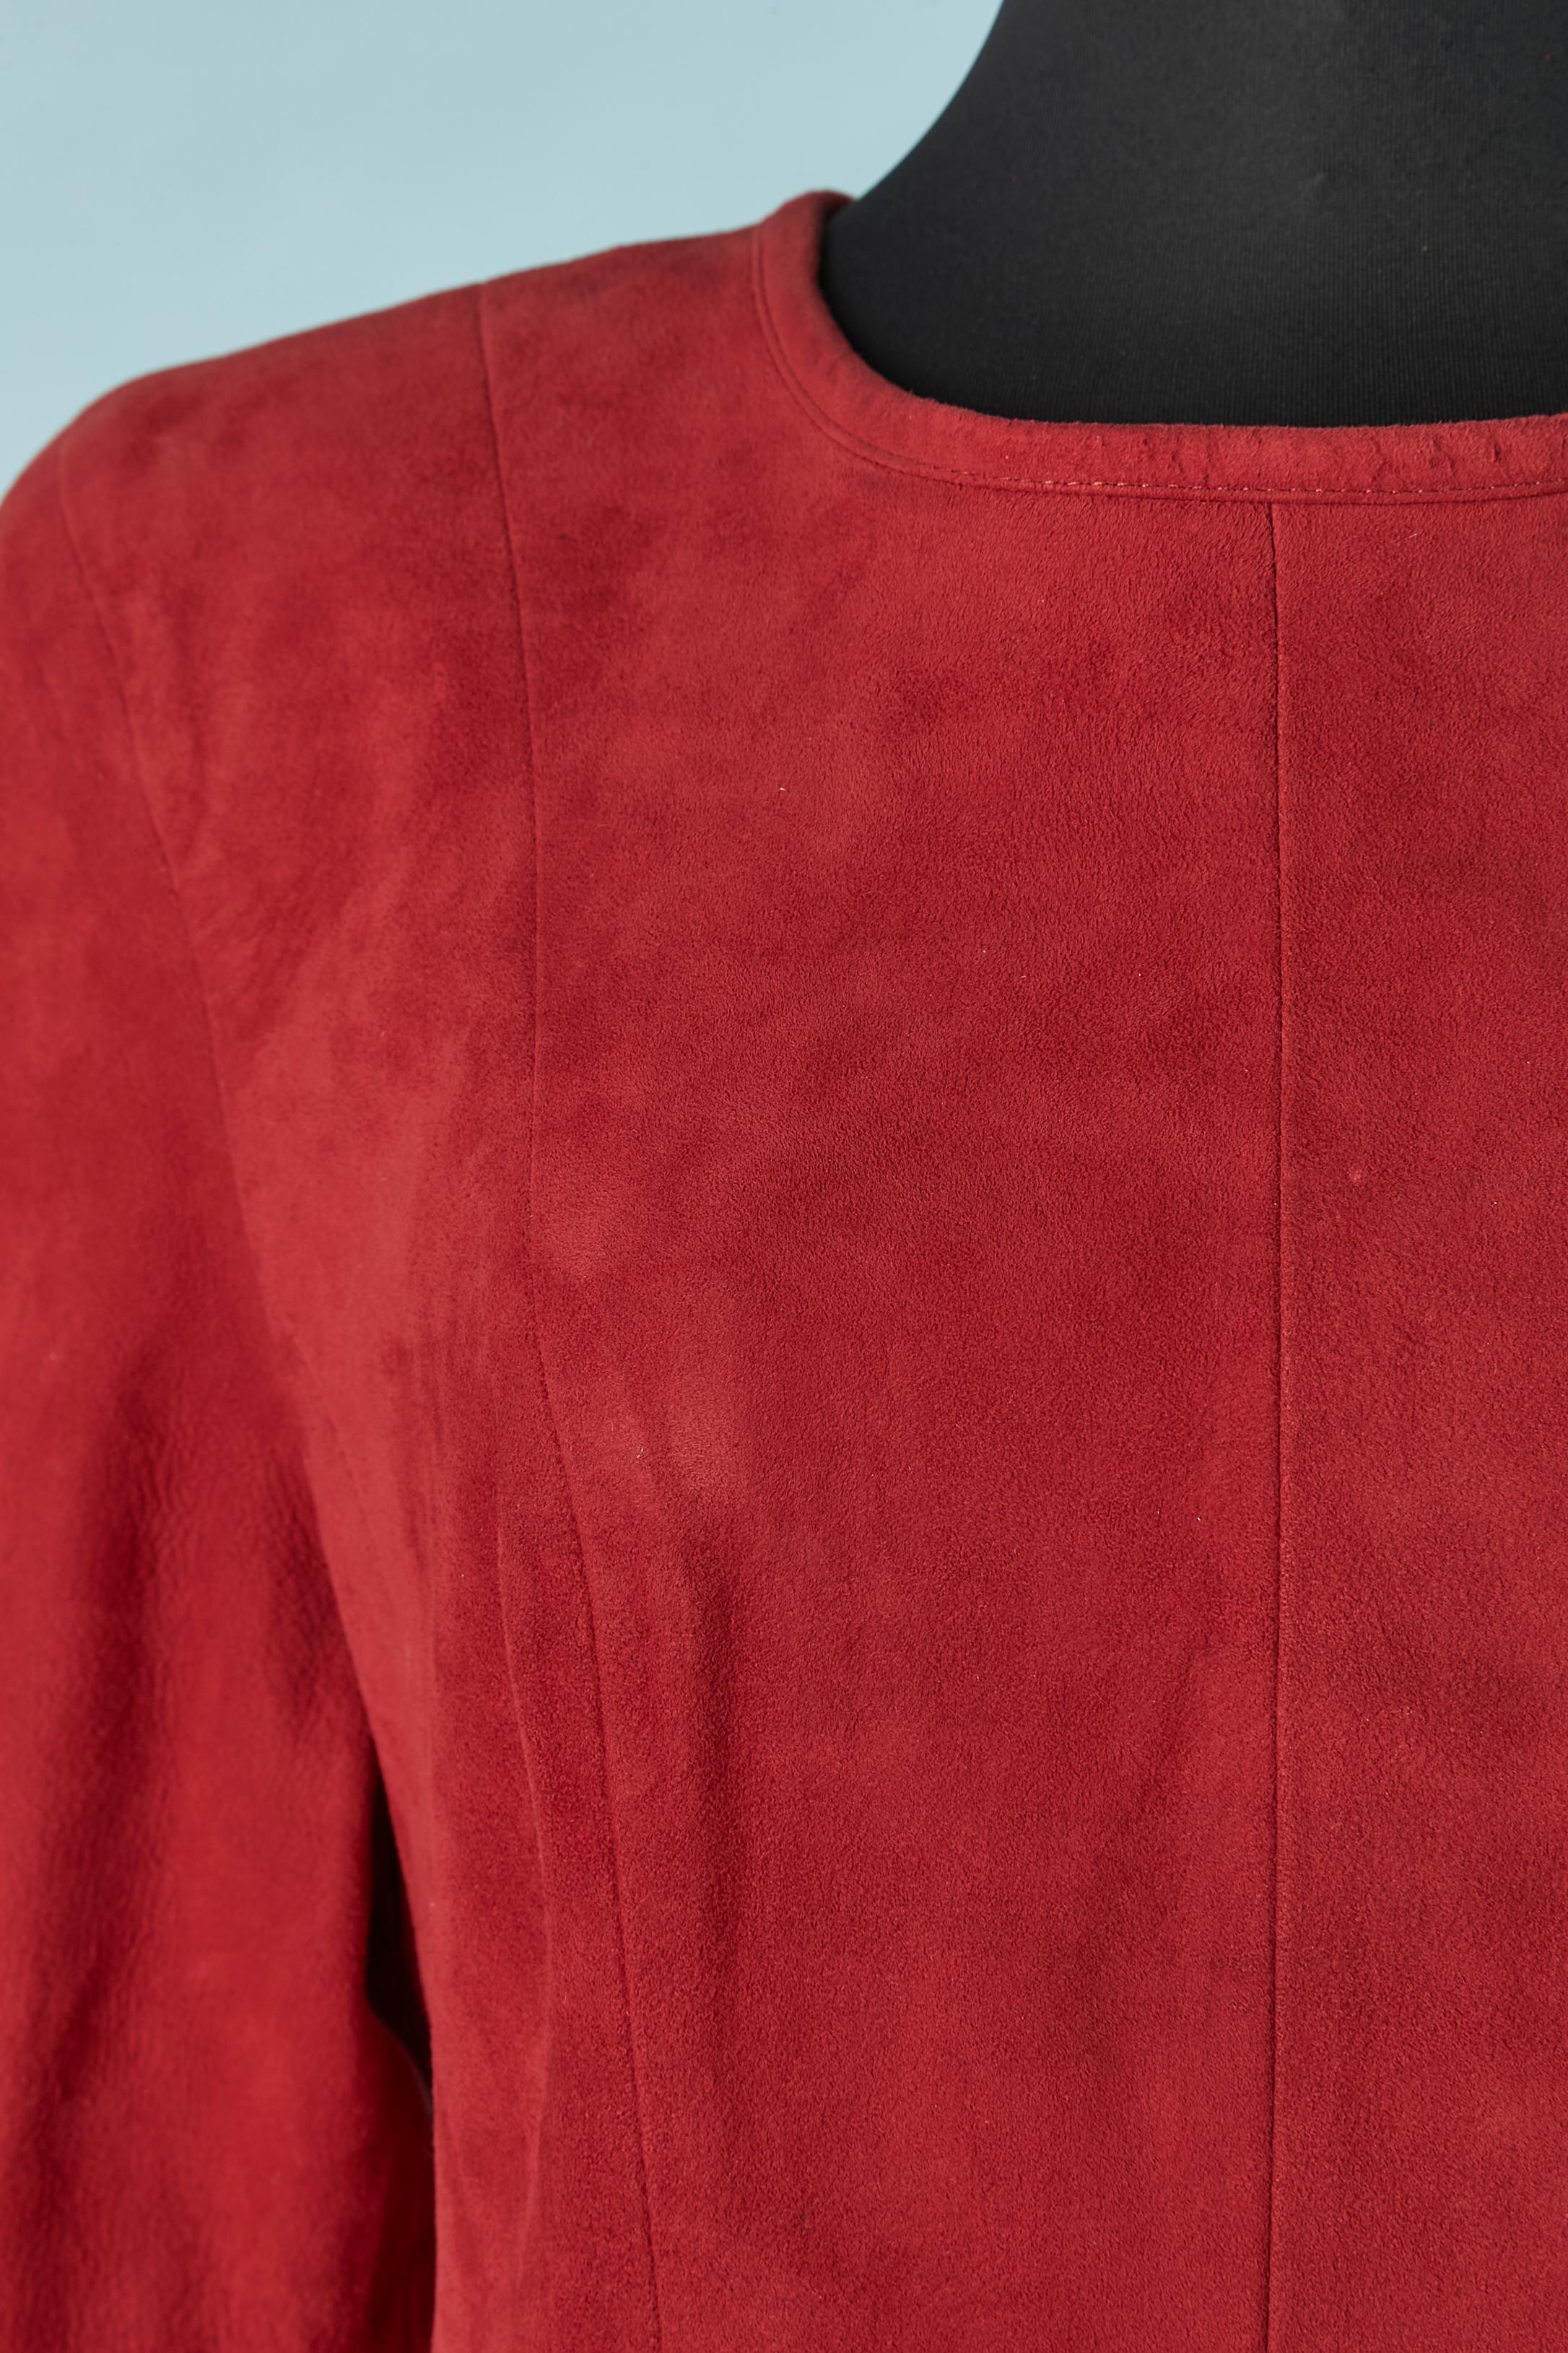 Red suede dress with long sleeves and open in the back. Suede is made of genuine leather and lining composition is rayon. 
One snap closure on the top middle back and zip in the middle back. 
SIZE 7/8 (US) L 